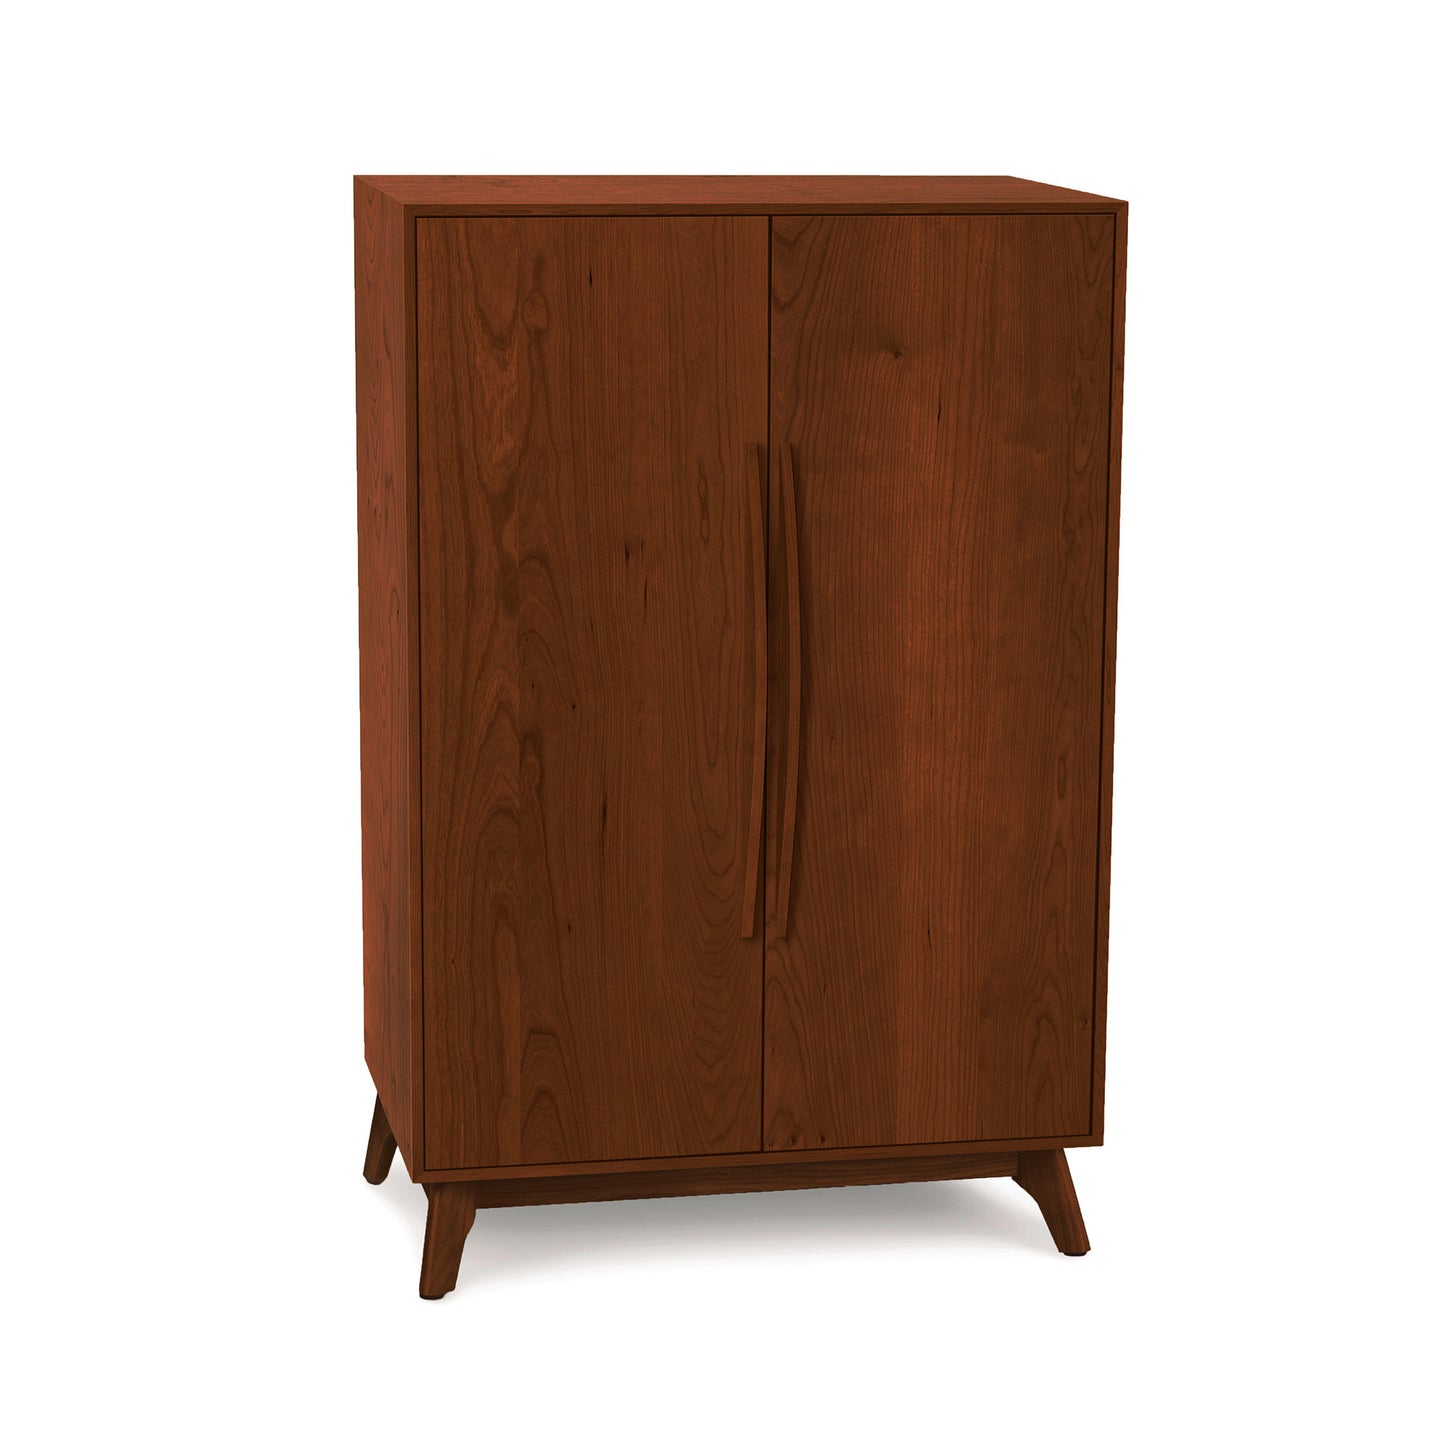 A Copeland Furniture Catalina Bar Cabinet designed for wine storage, with closed double doors, standing on angled legs, isolated against a white background.